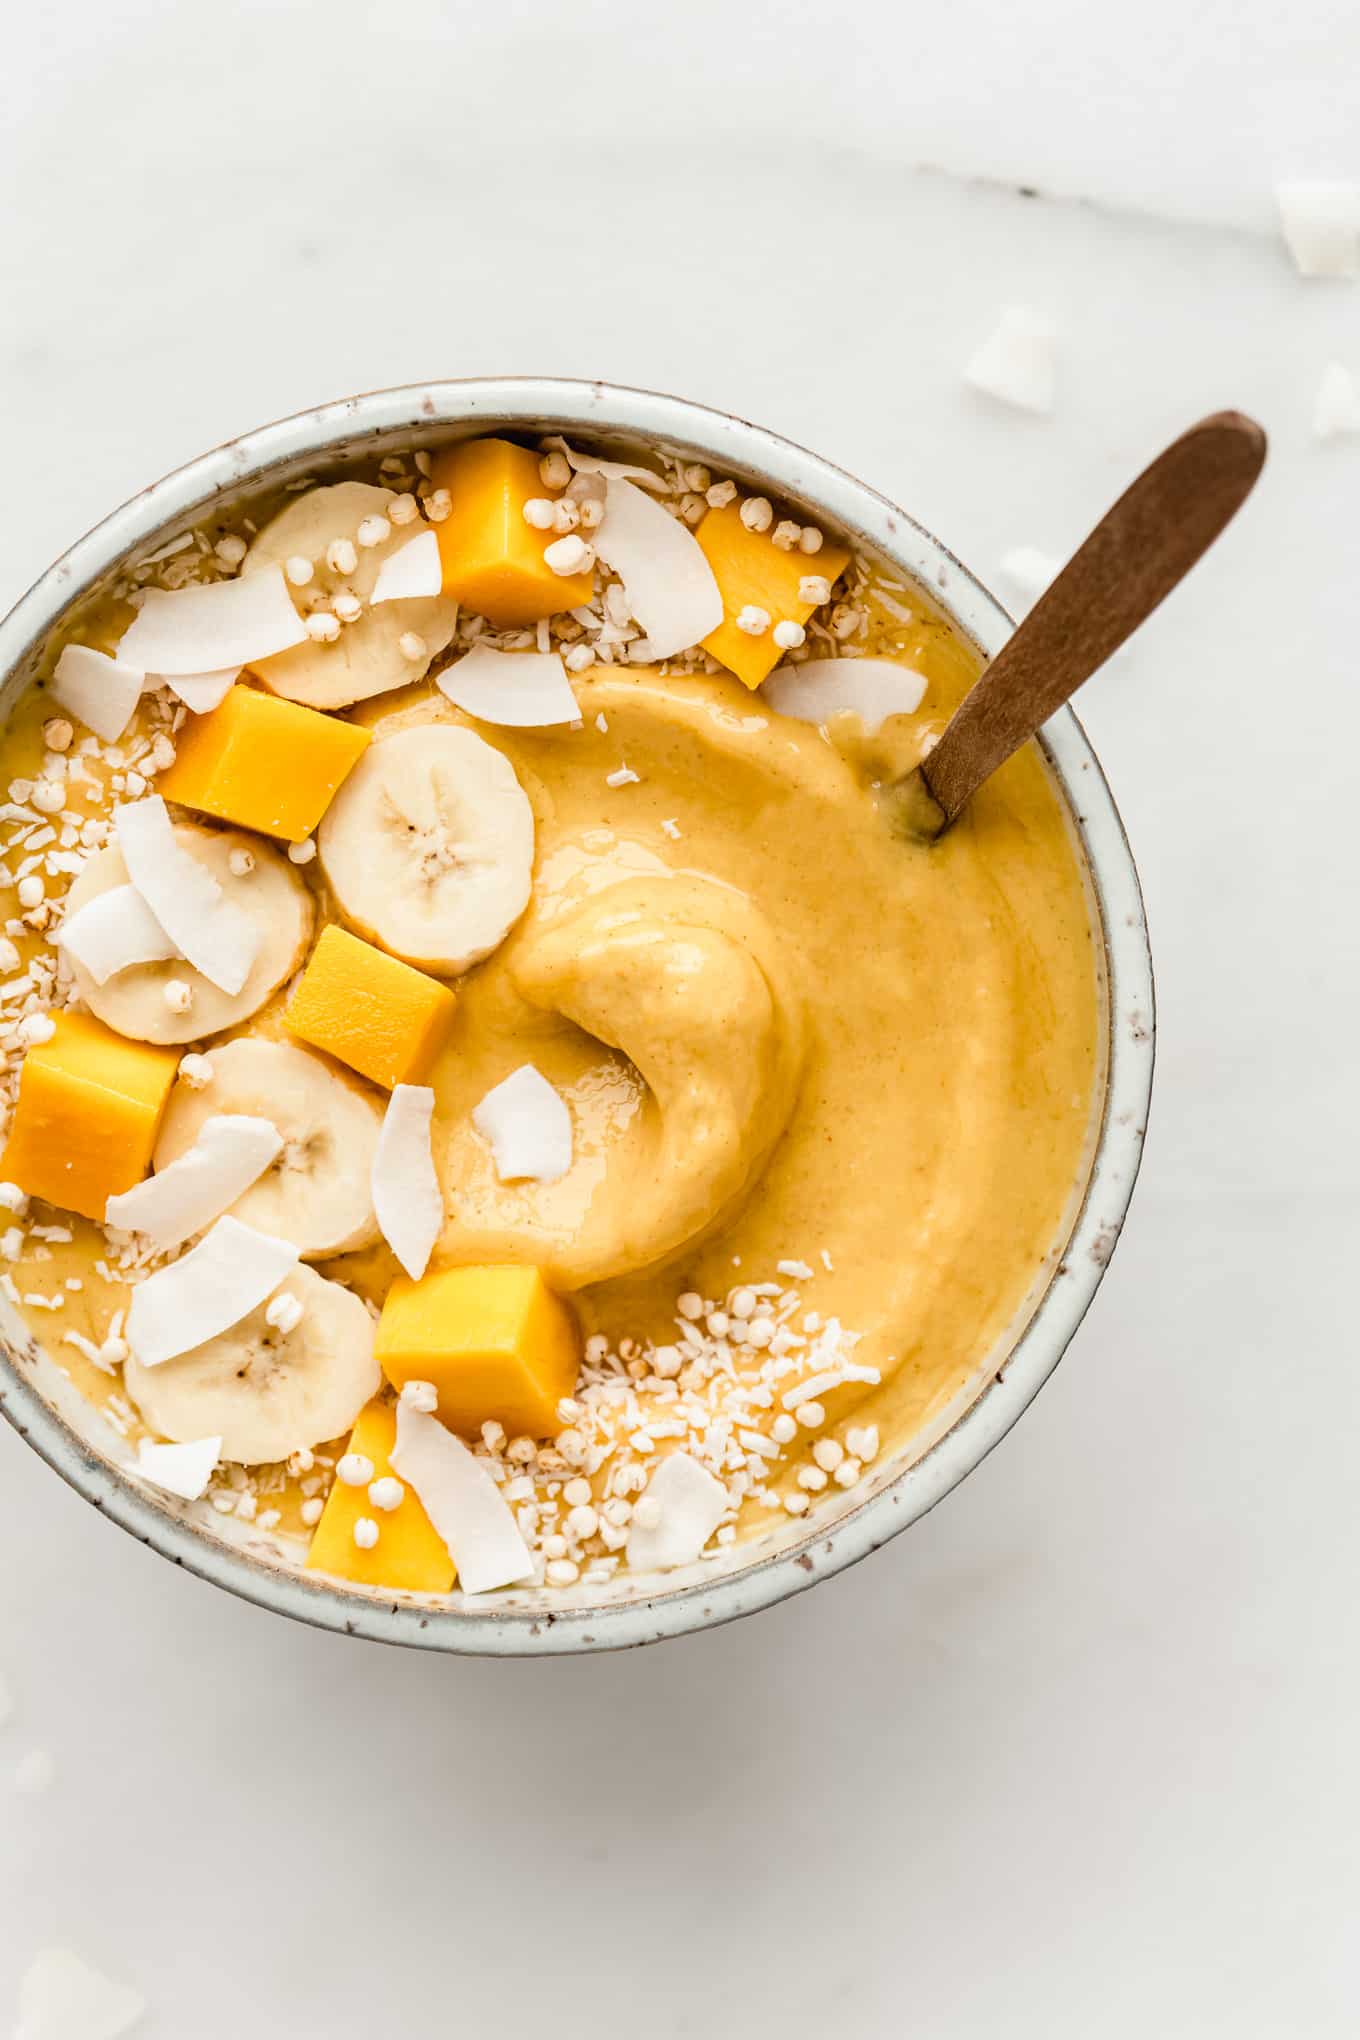 A mango smoothie bowl topped with fruits and coconut flakes